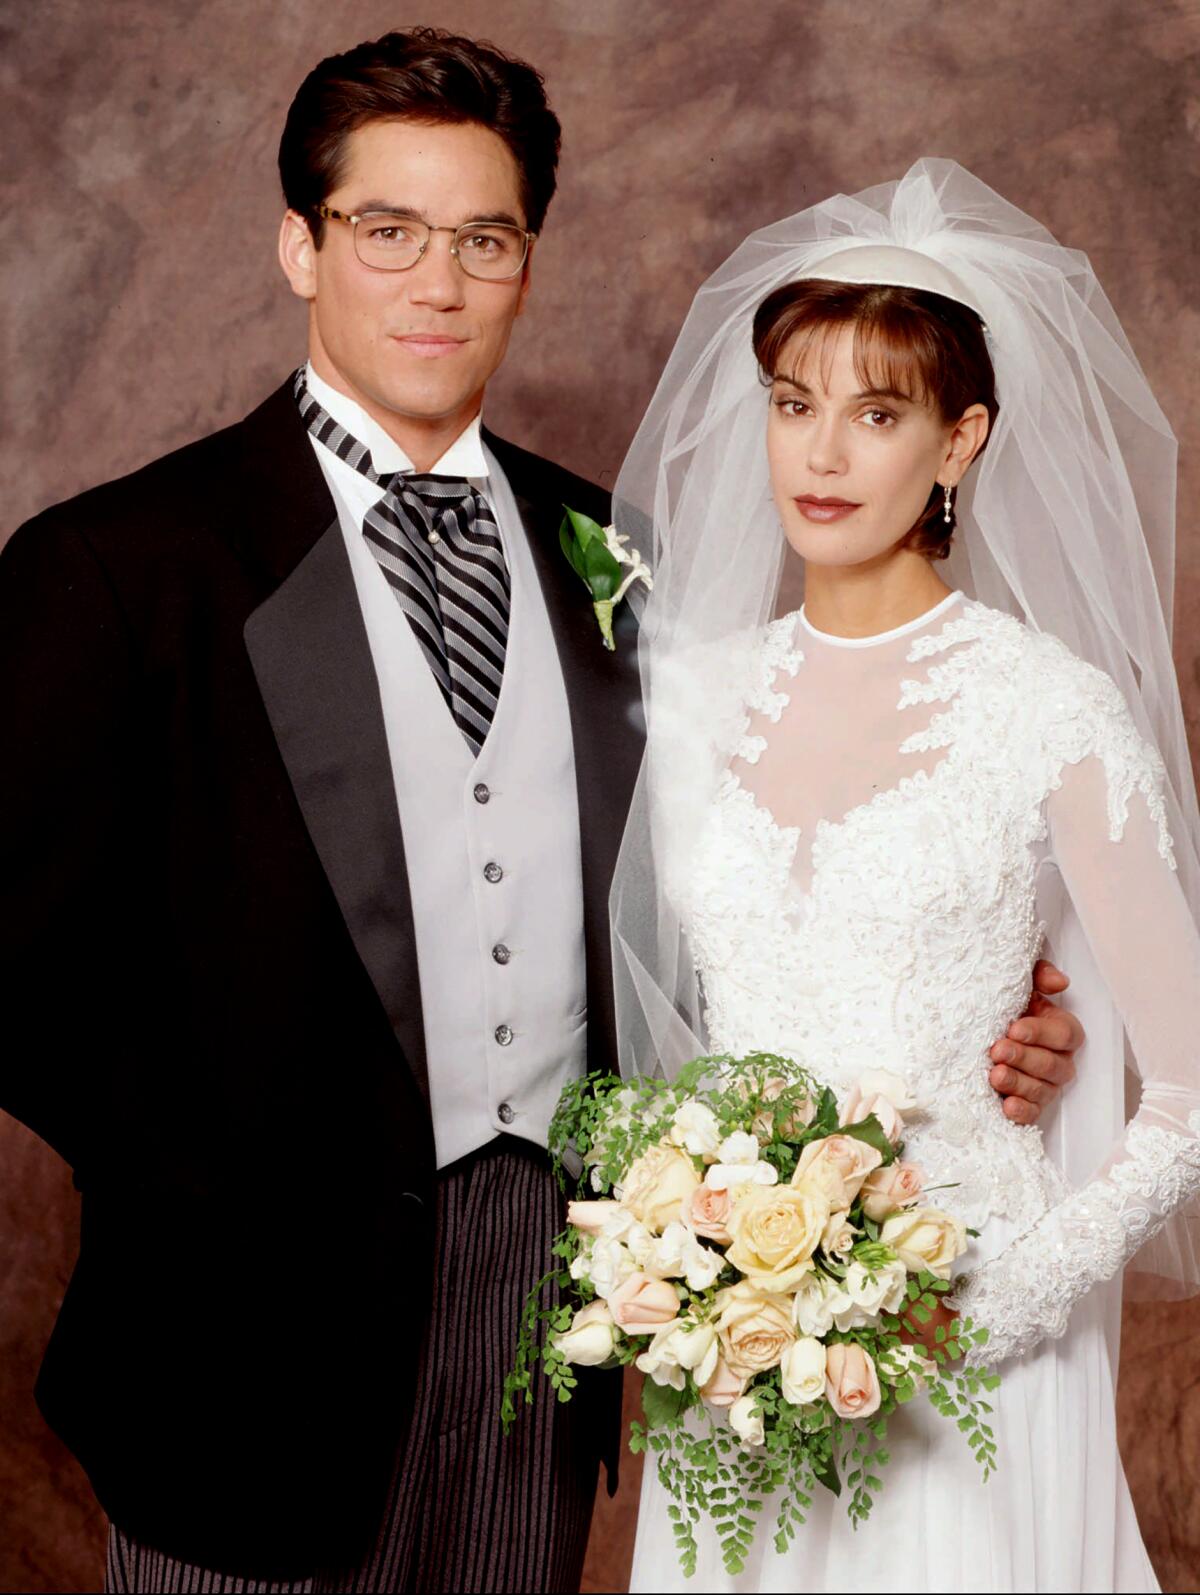 Clark Kent in a tailcoat suit and Lois Lane in a white wedding dress and veil holding a bouquet of flowers.